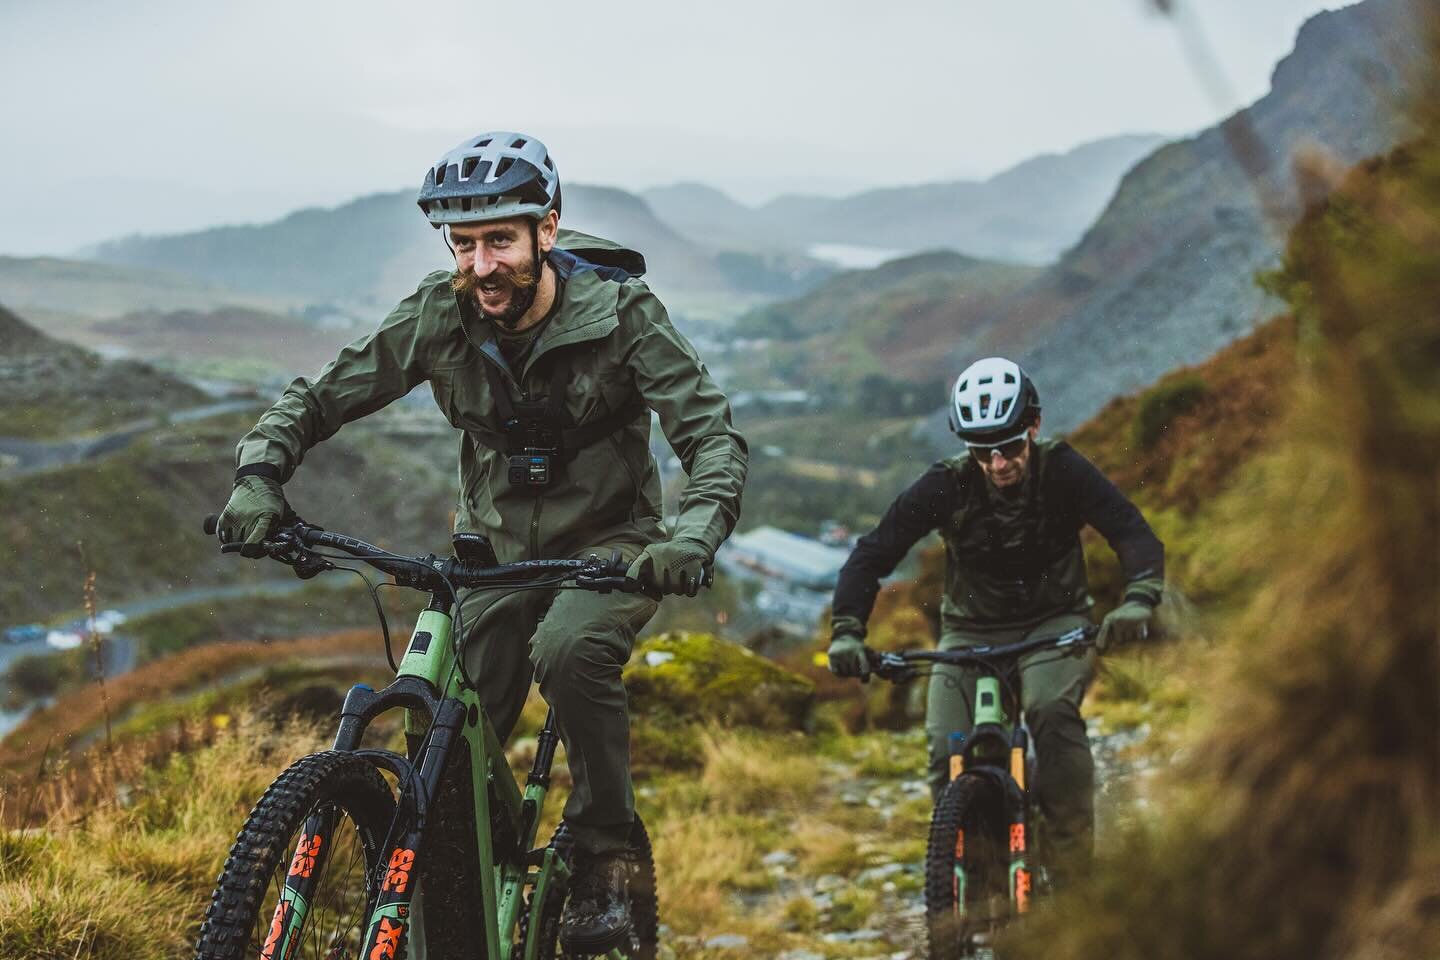 Back at the end of &lsquo;23, I joined @mbukmagazine and @saracenbikes for a day at Antur Stiniog. 

Antur is always somewhere I&rsquo;d wanted to shoot, particularly for its backdrops, and it&rsquo;s fair to say those didn&rsquo;t disappoint&hellip;